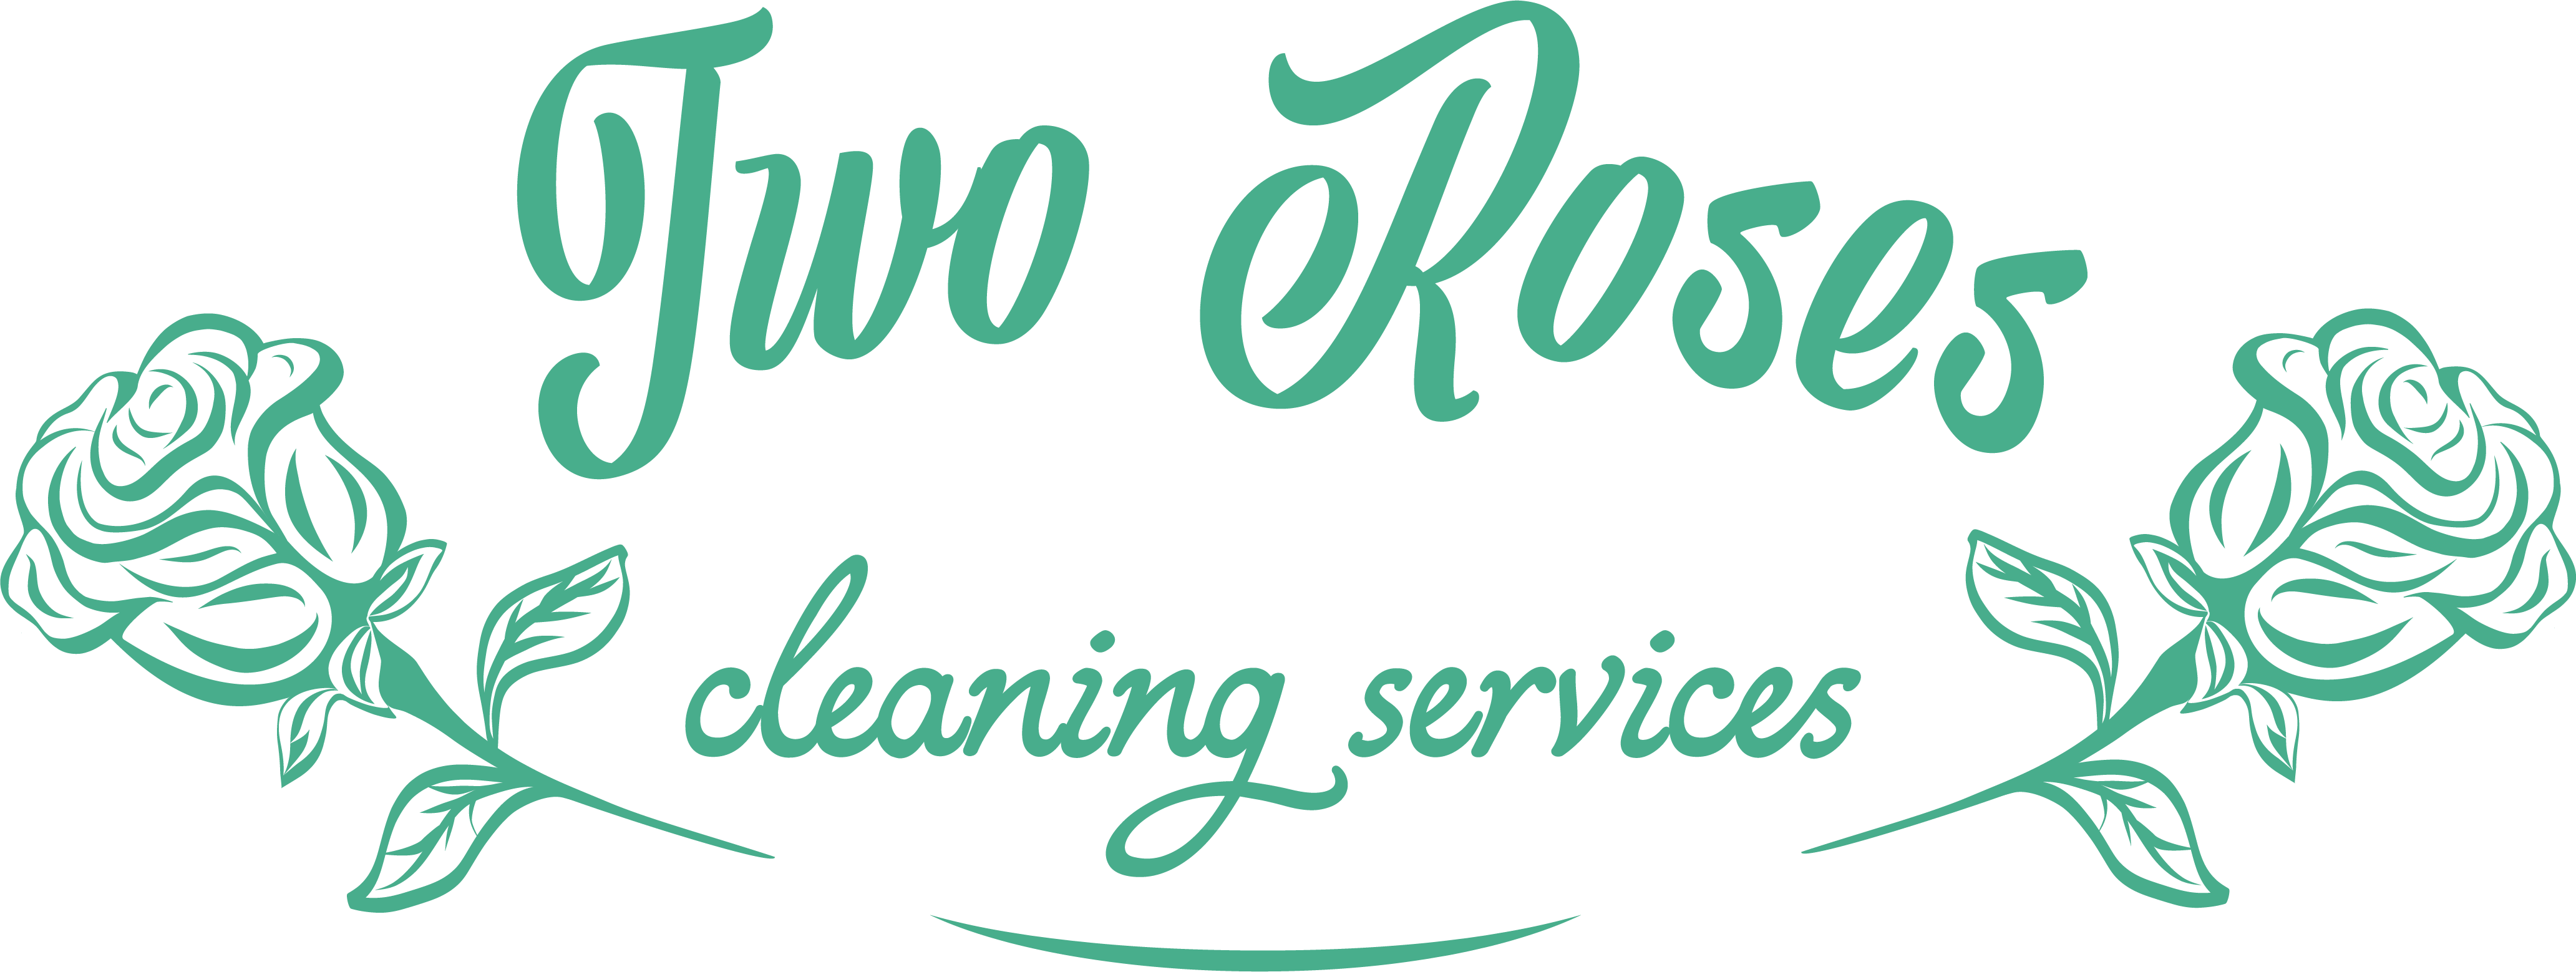 two roses cleaning services 